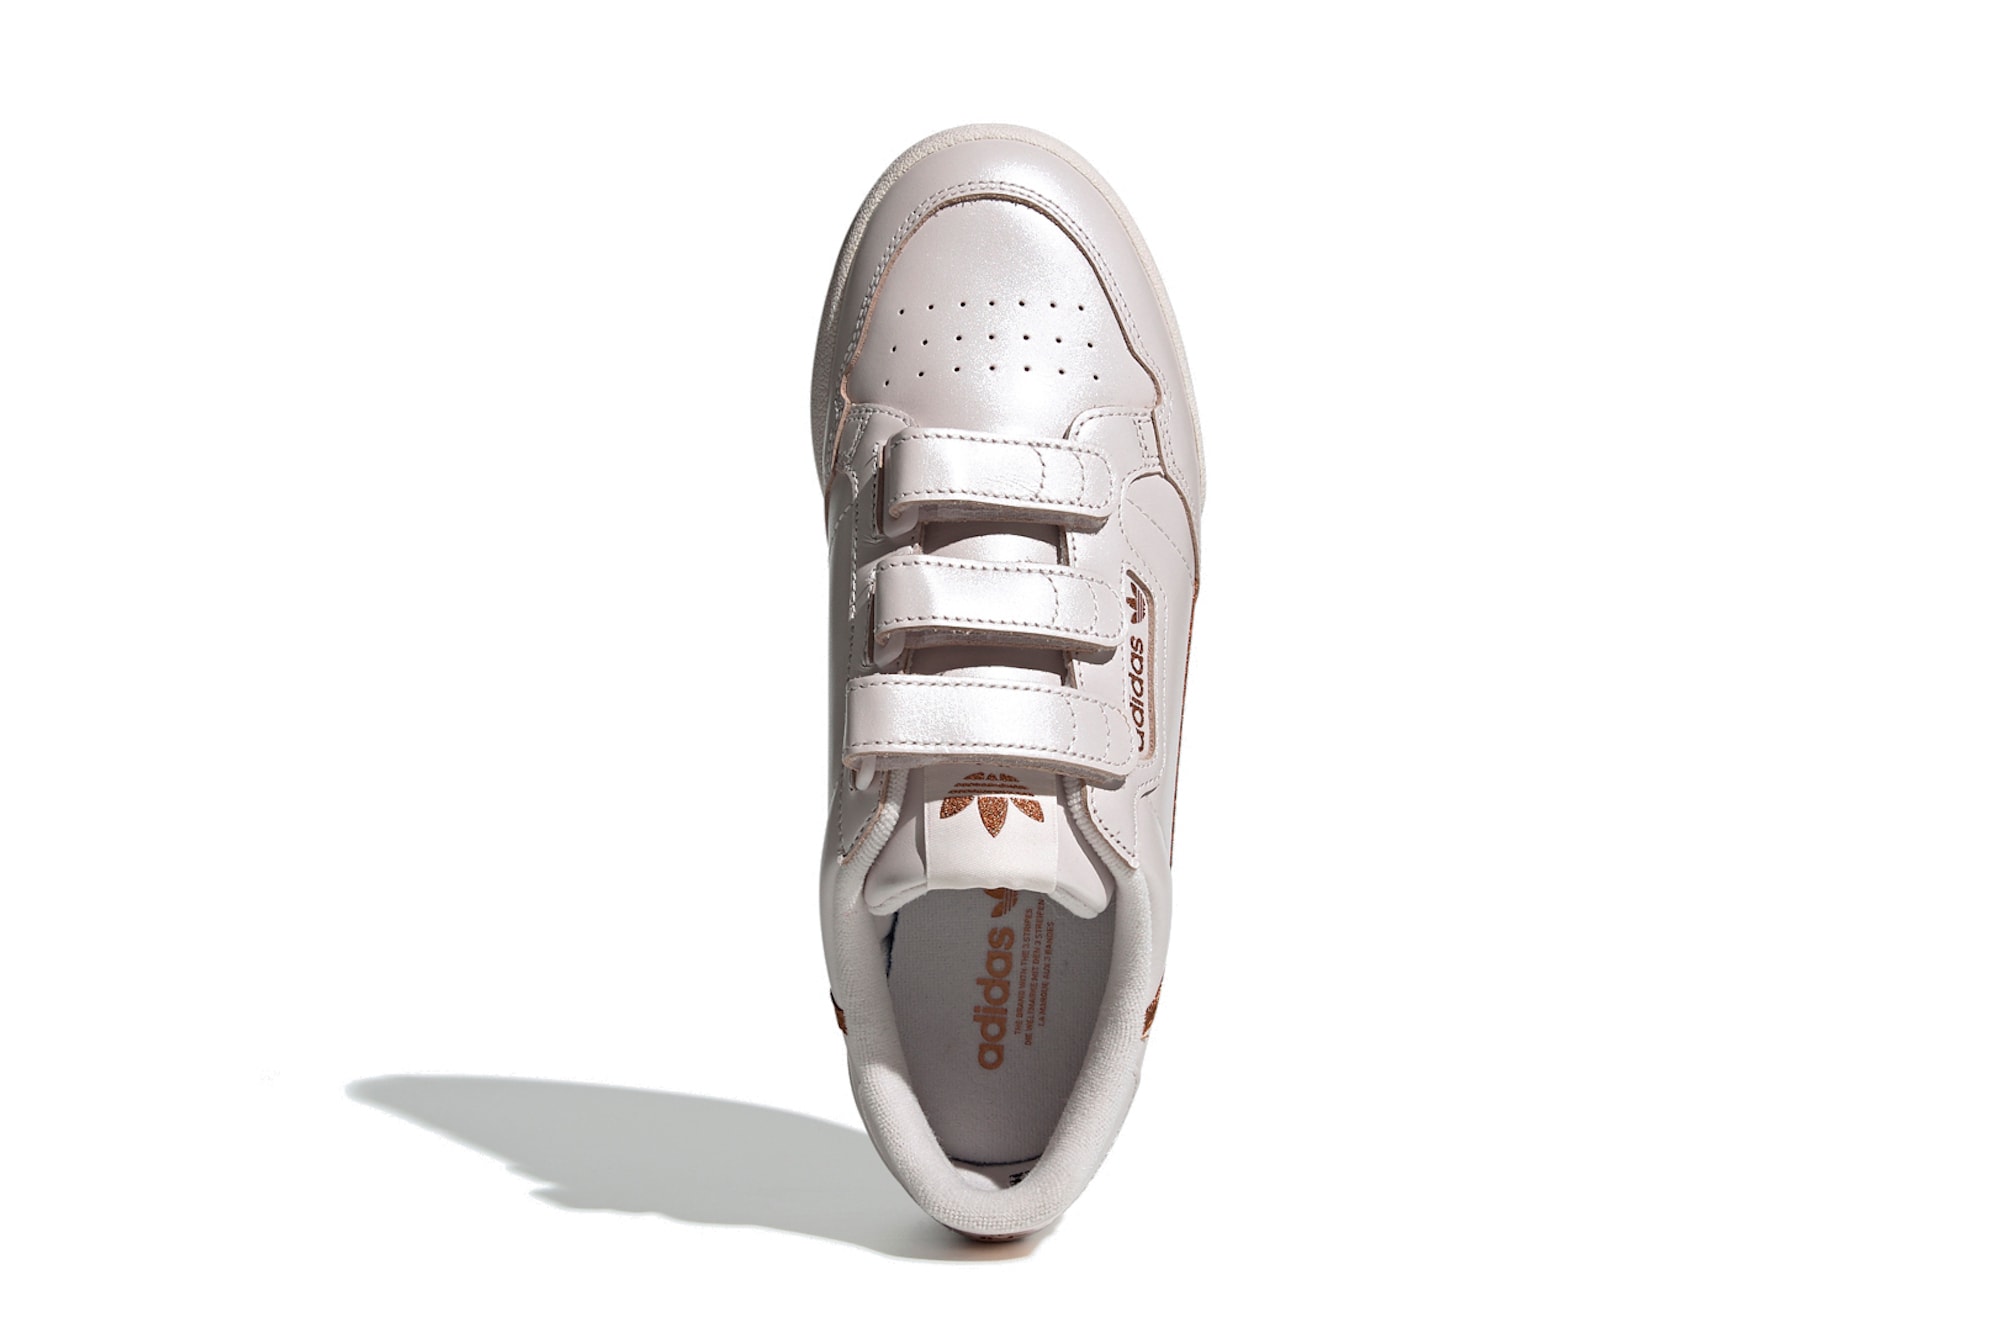 adidas Originals Continental 80 "Pearl Pink" Sneaker Shoe Iridescent Trainer Pearly Rose Velcro Straps Retro